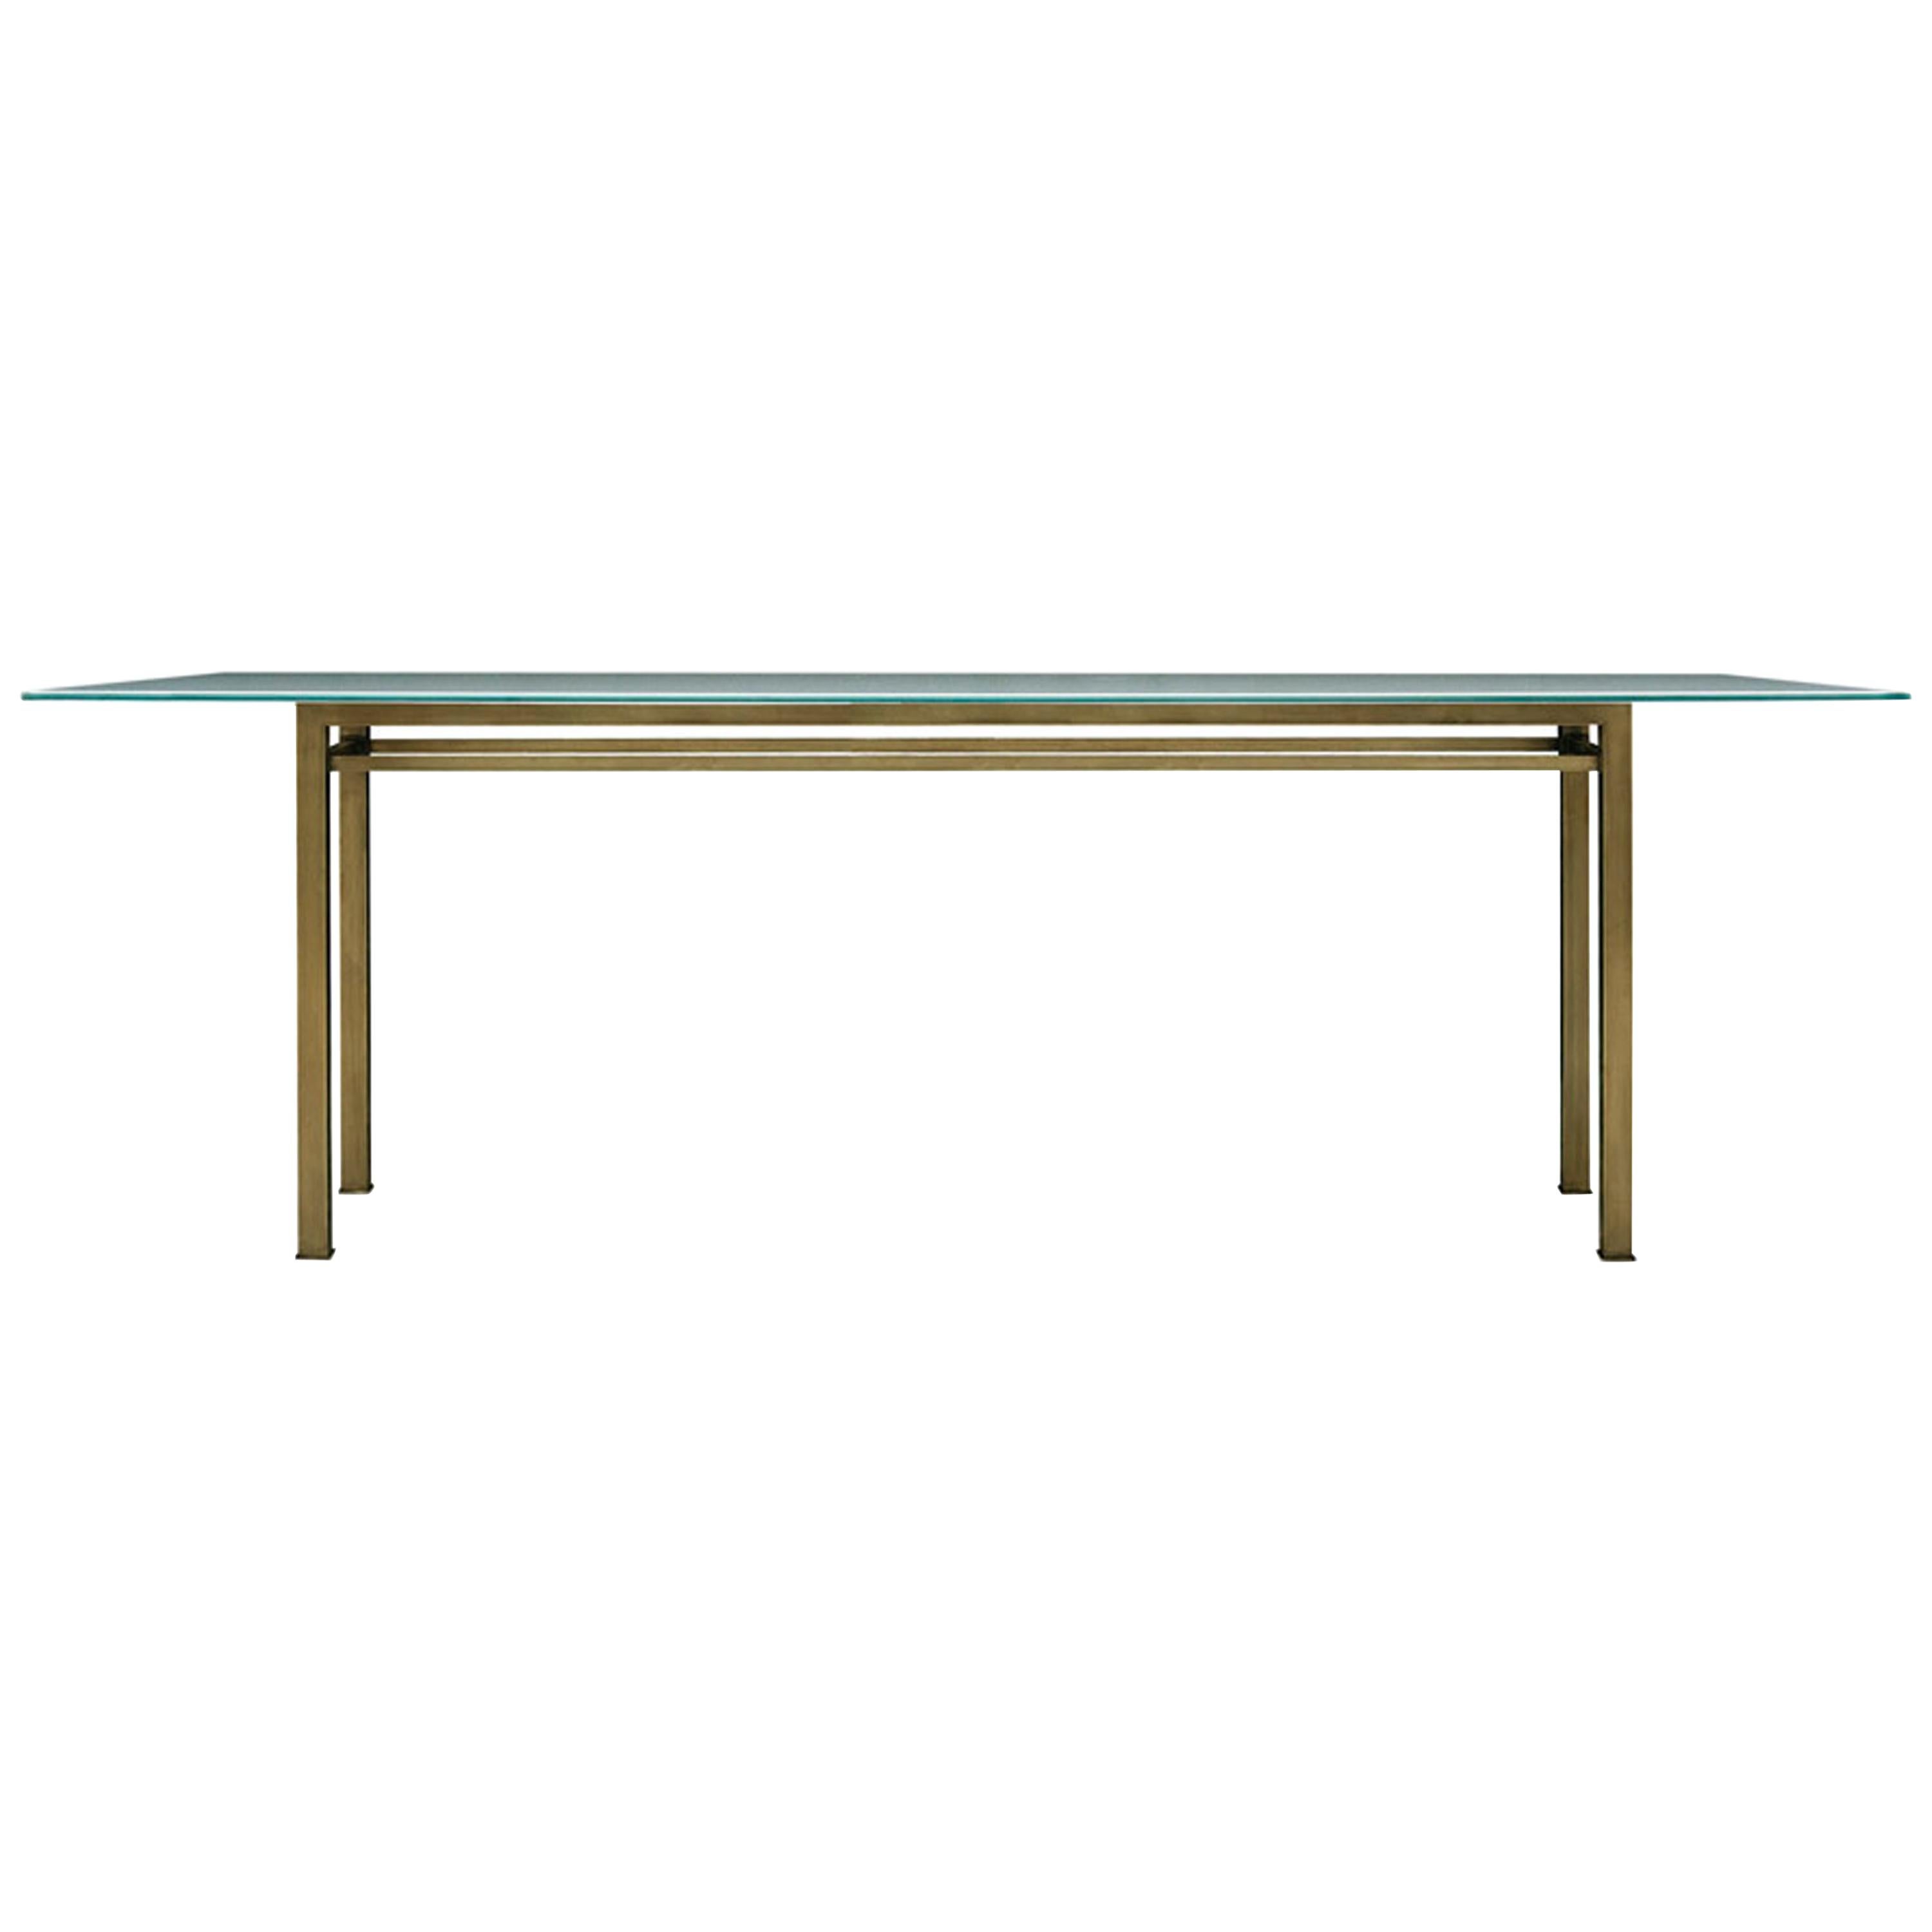 90° Glass & Metal Rectangular Dining Table, Vica designed by Annabelle Selldorf